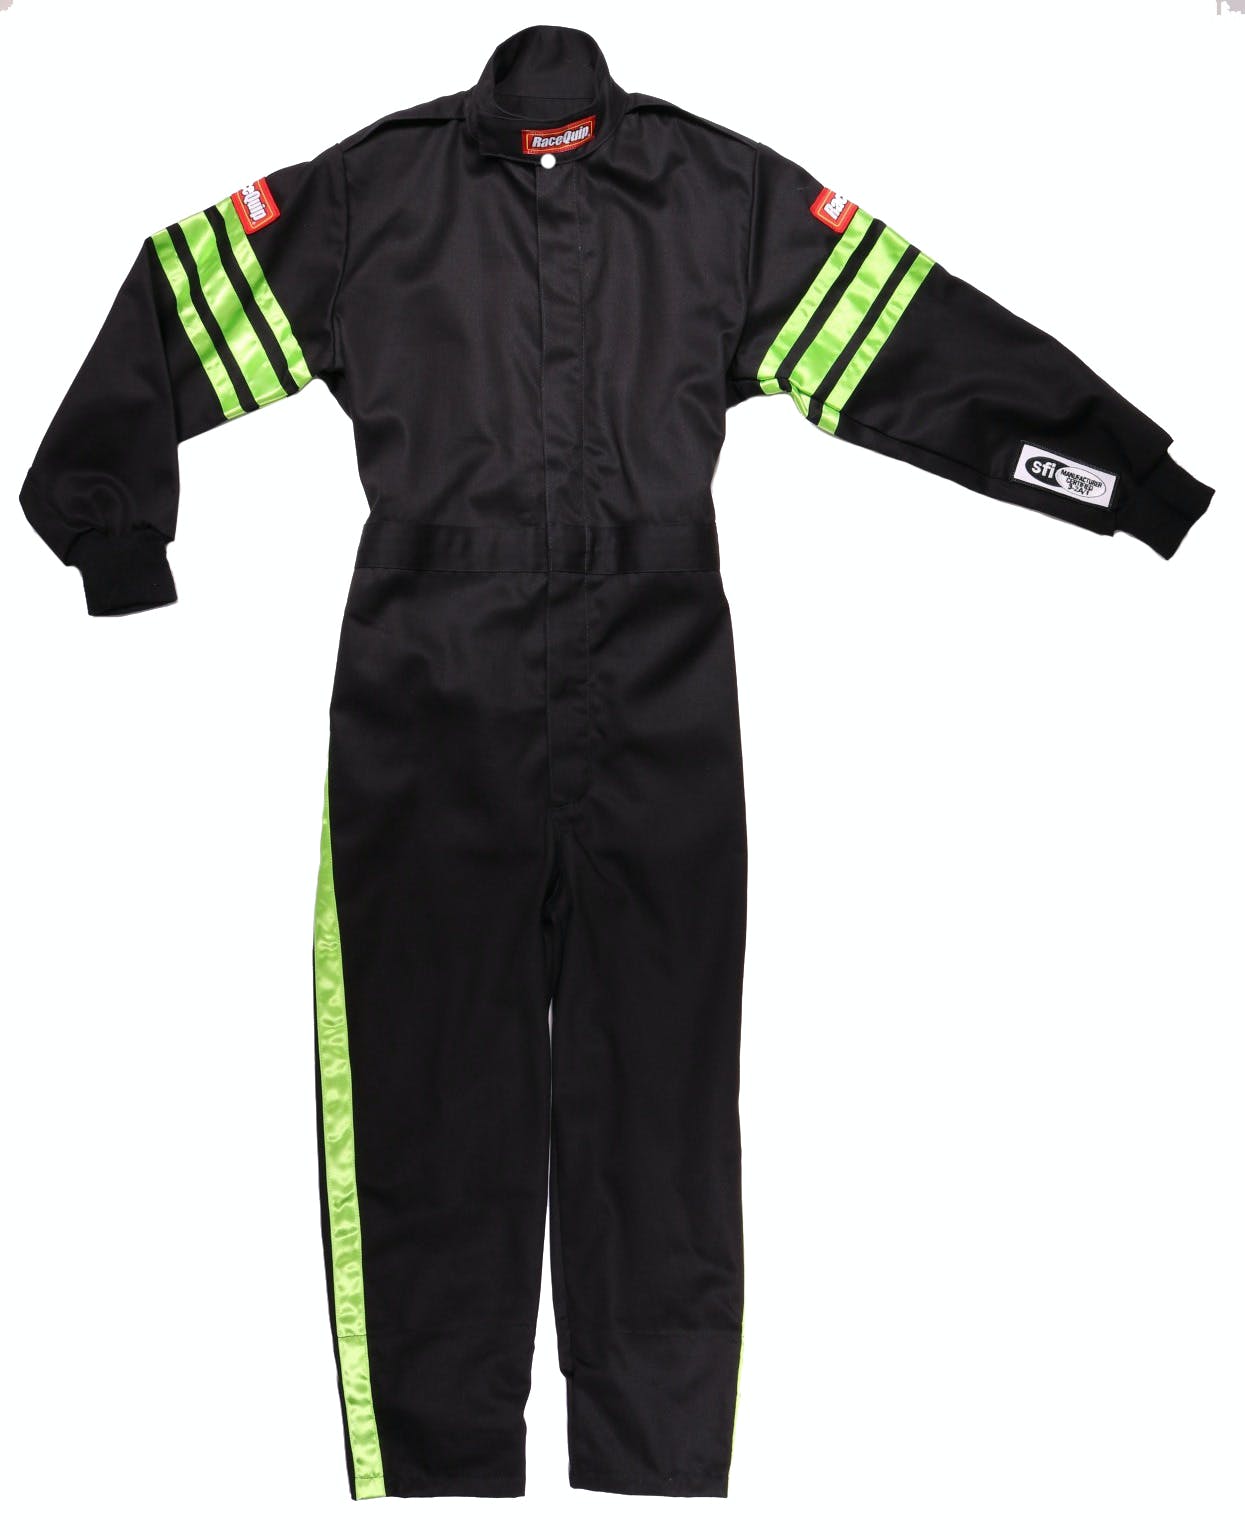 RaceQuip 1950797 SFI-1 Pyrovatex One-Piece Single-Layer Youth Racing Fire Suit (Black/Green-XXL)